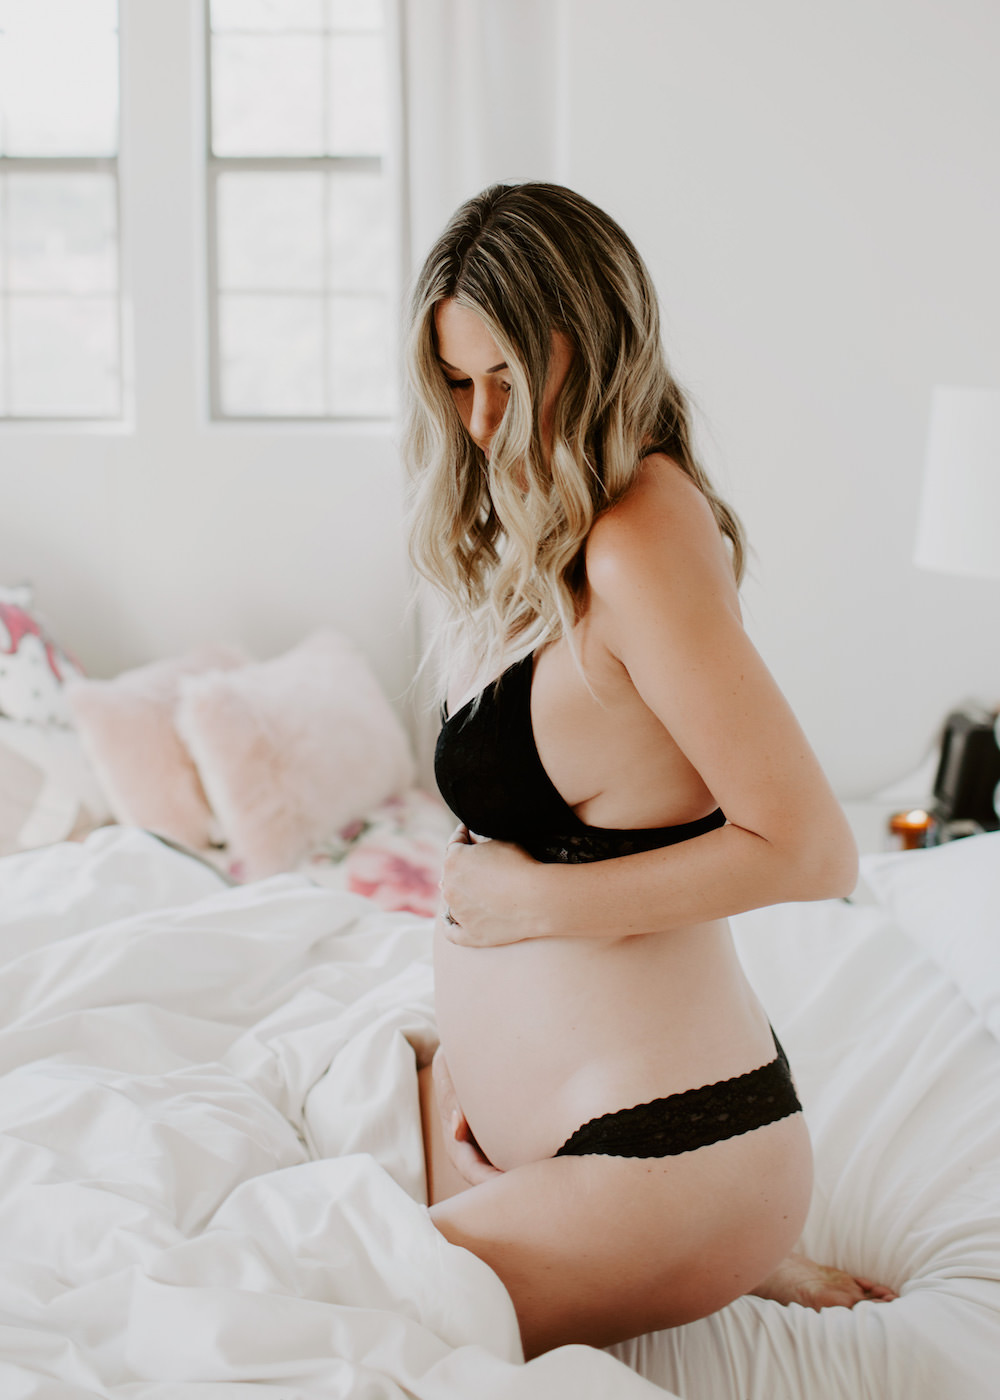 Dash of Darling shares how to avoid getting stretch marks during pregnancy by using her favorite beauty products like coconut melt